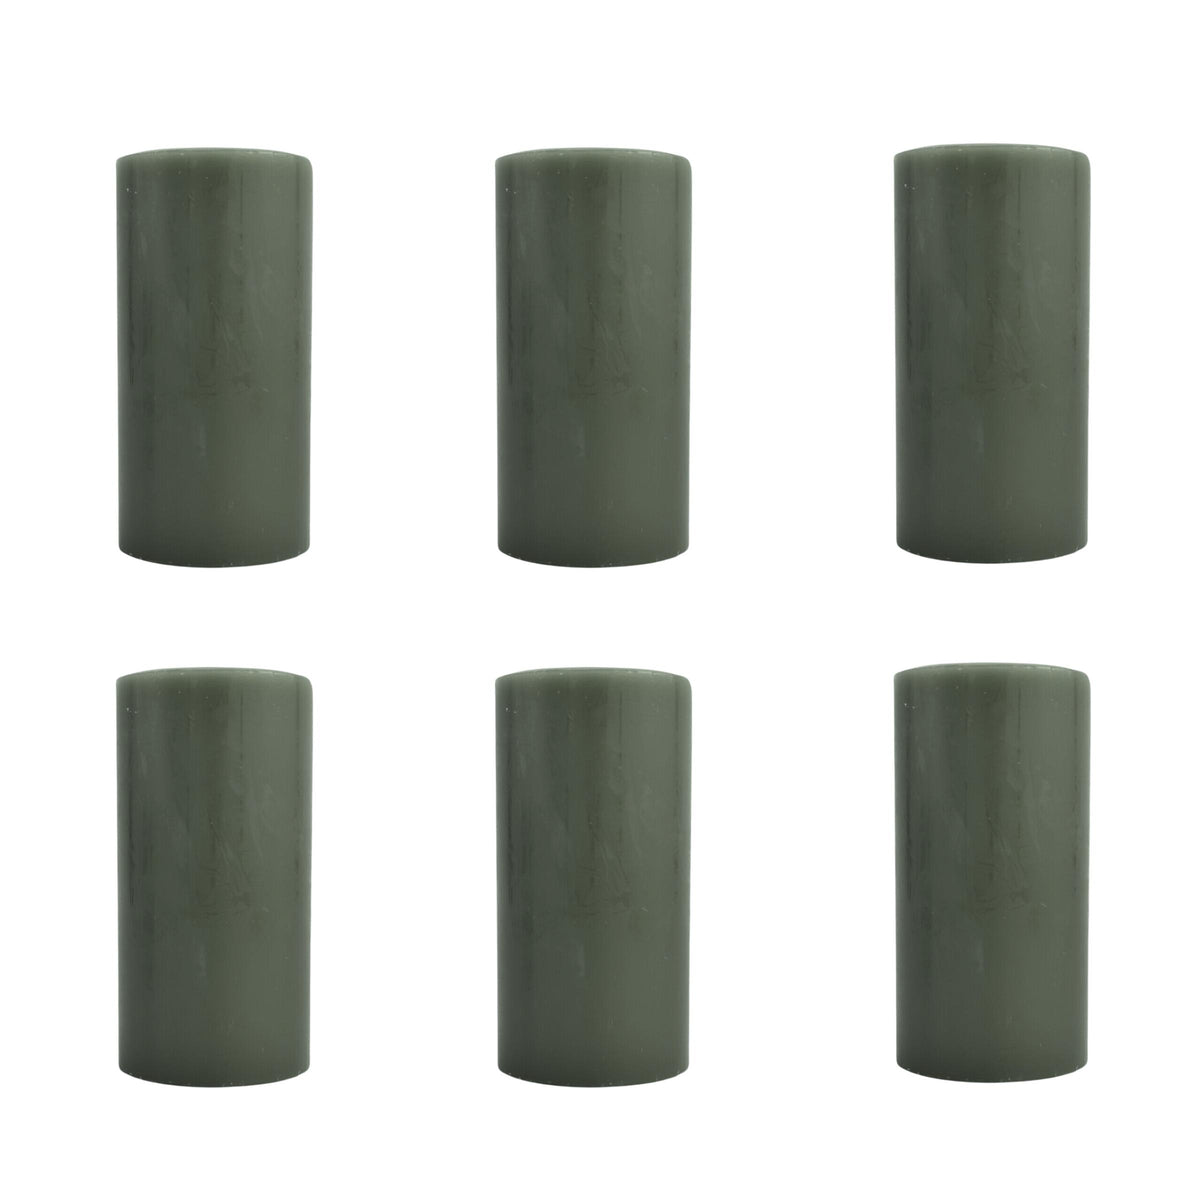 Cape Candle - Scented Bayberry Pillar 3X6 (Case of 6)